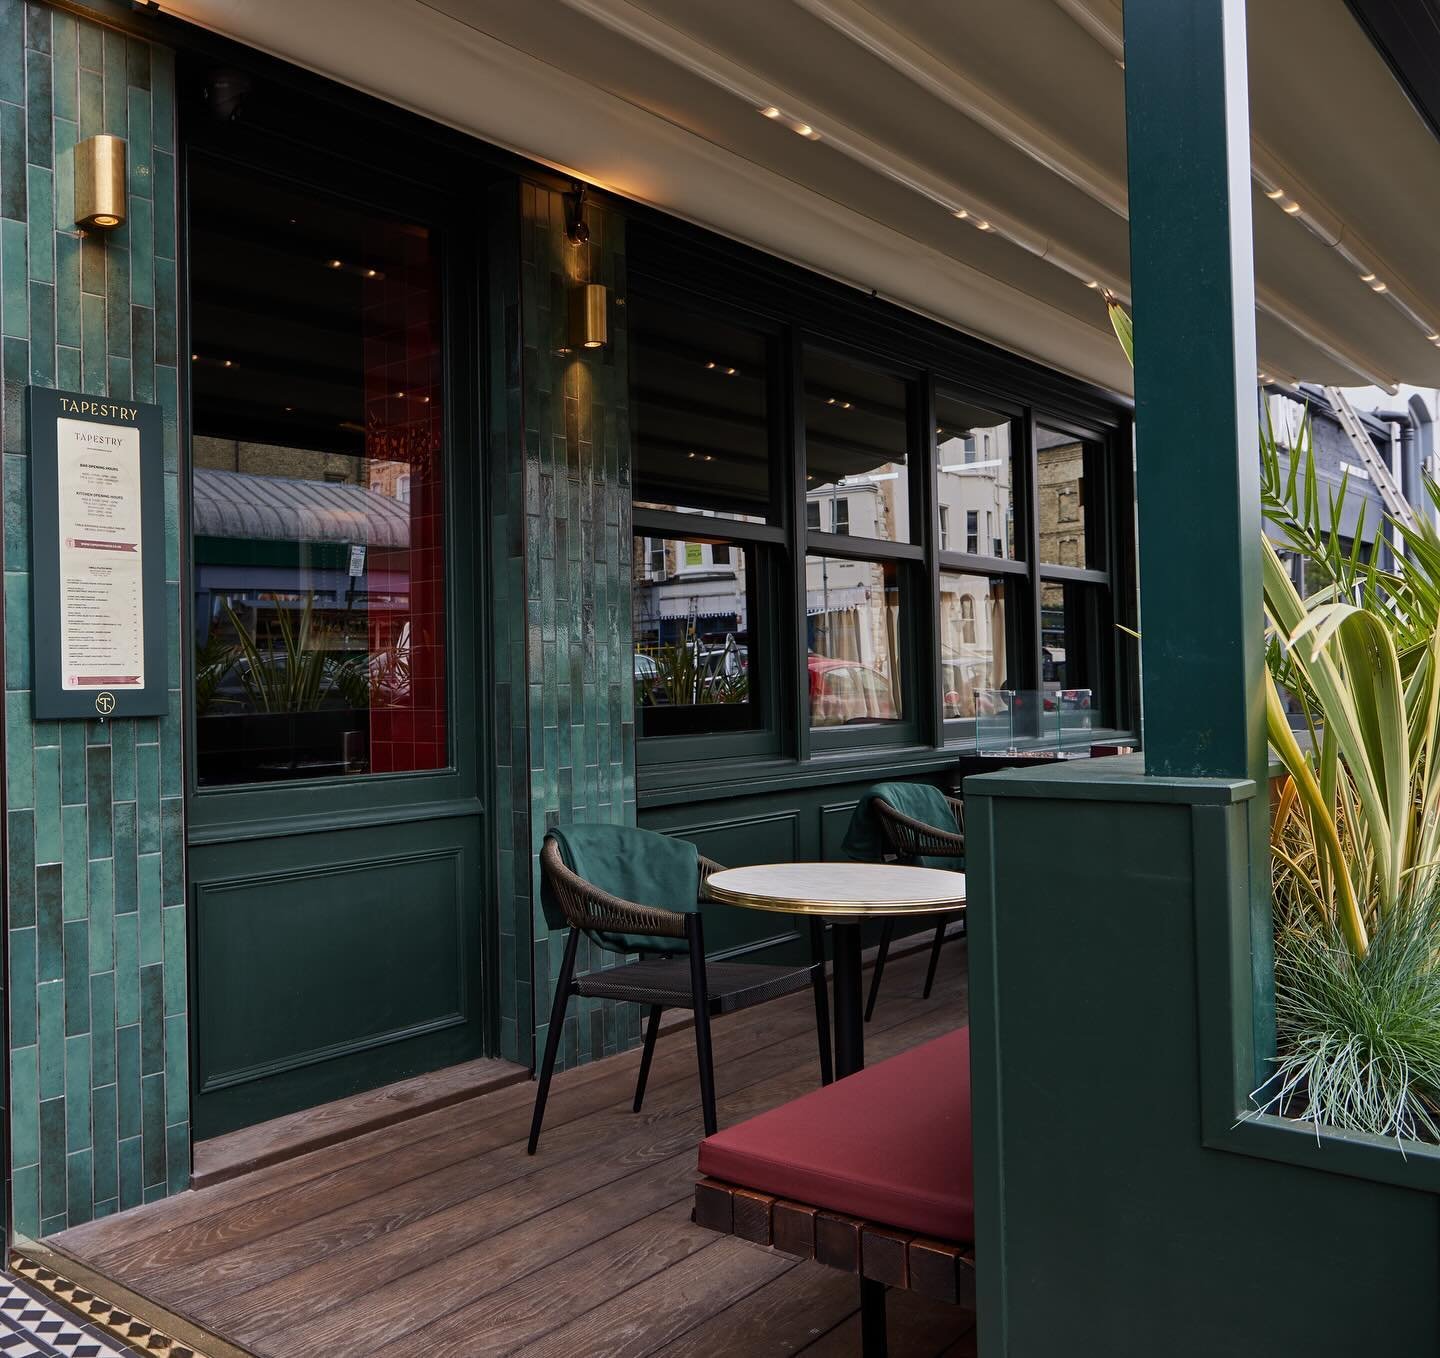 Our terrace looks great in this Sun... and even better on a summers evening ... swing by and take a look 👀 

#hoveactually #hovefoodie #tapestryhove